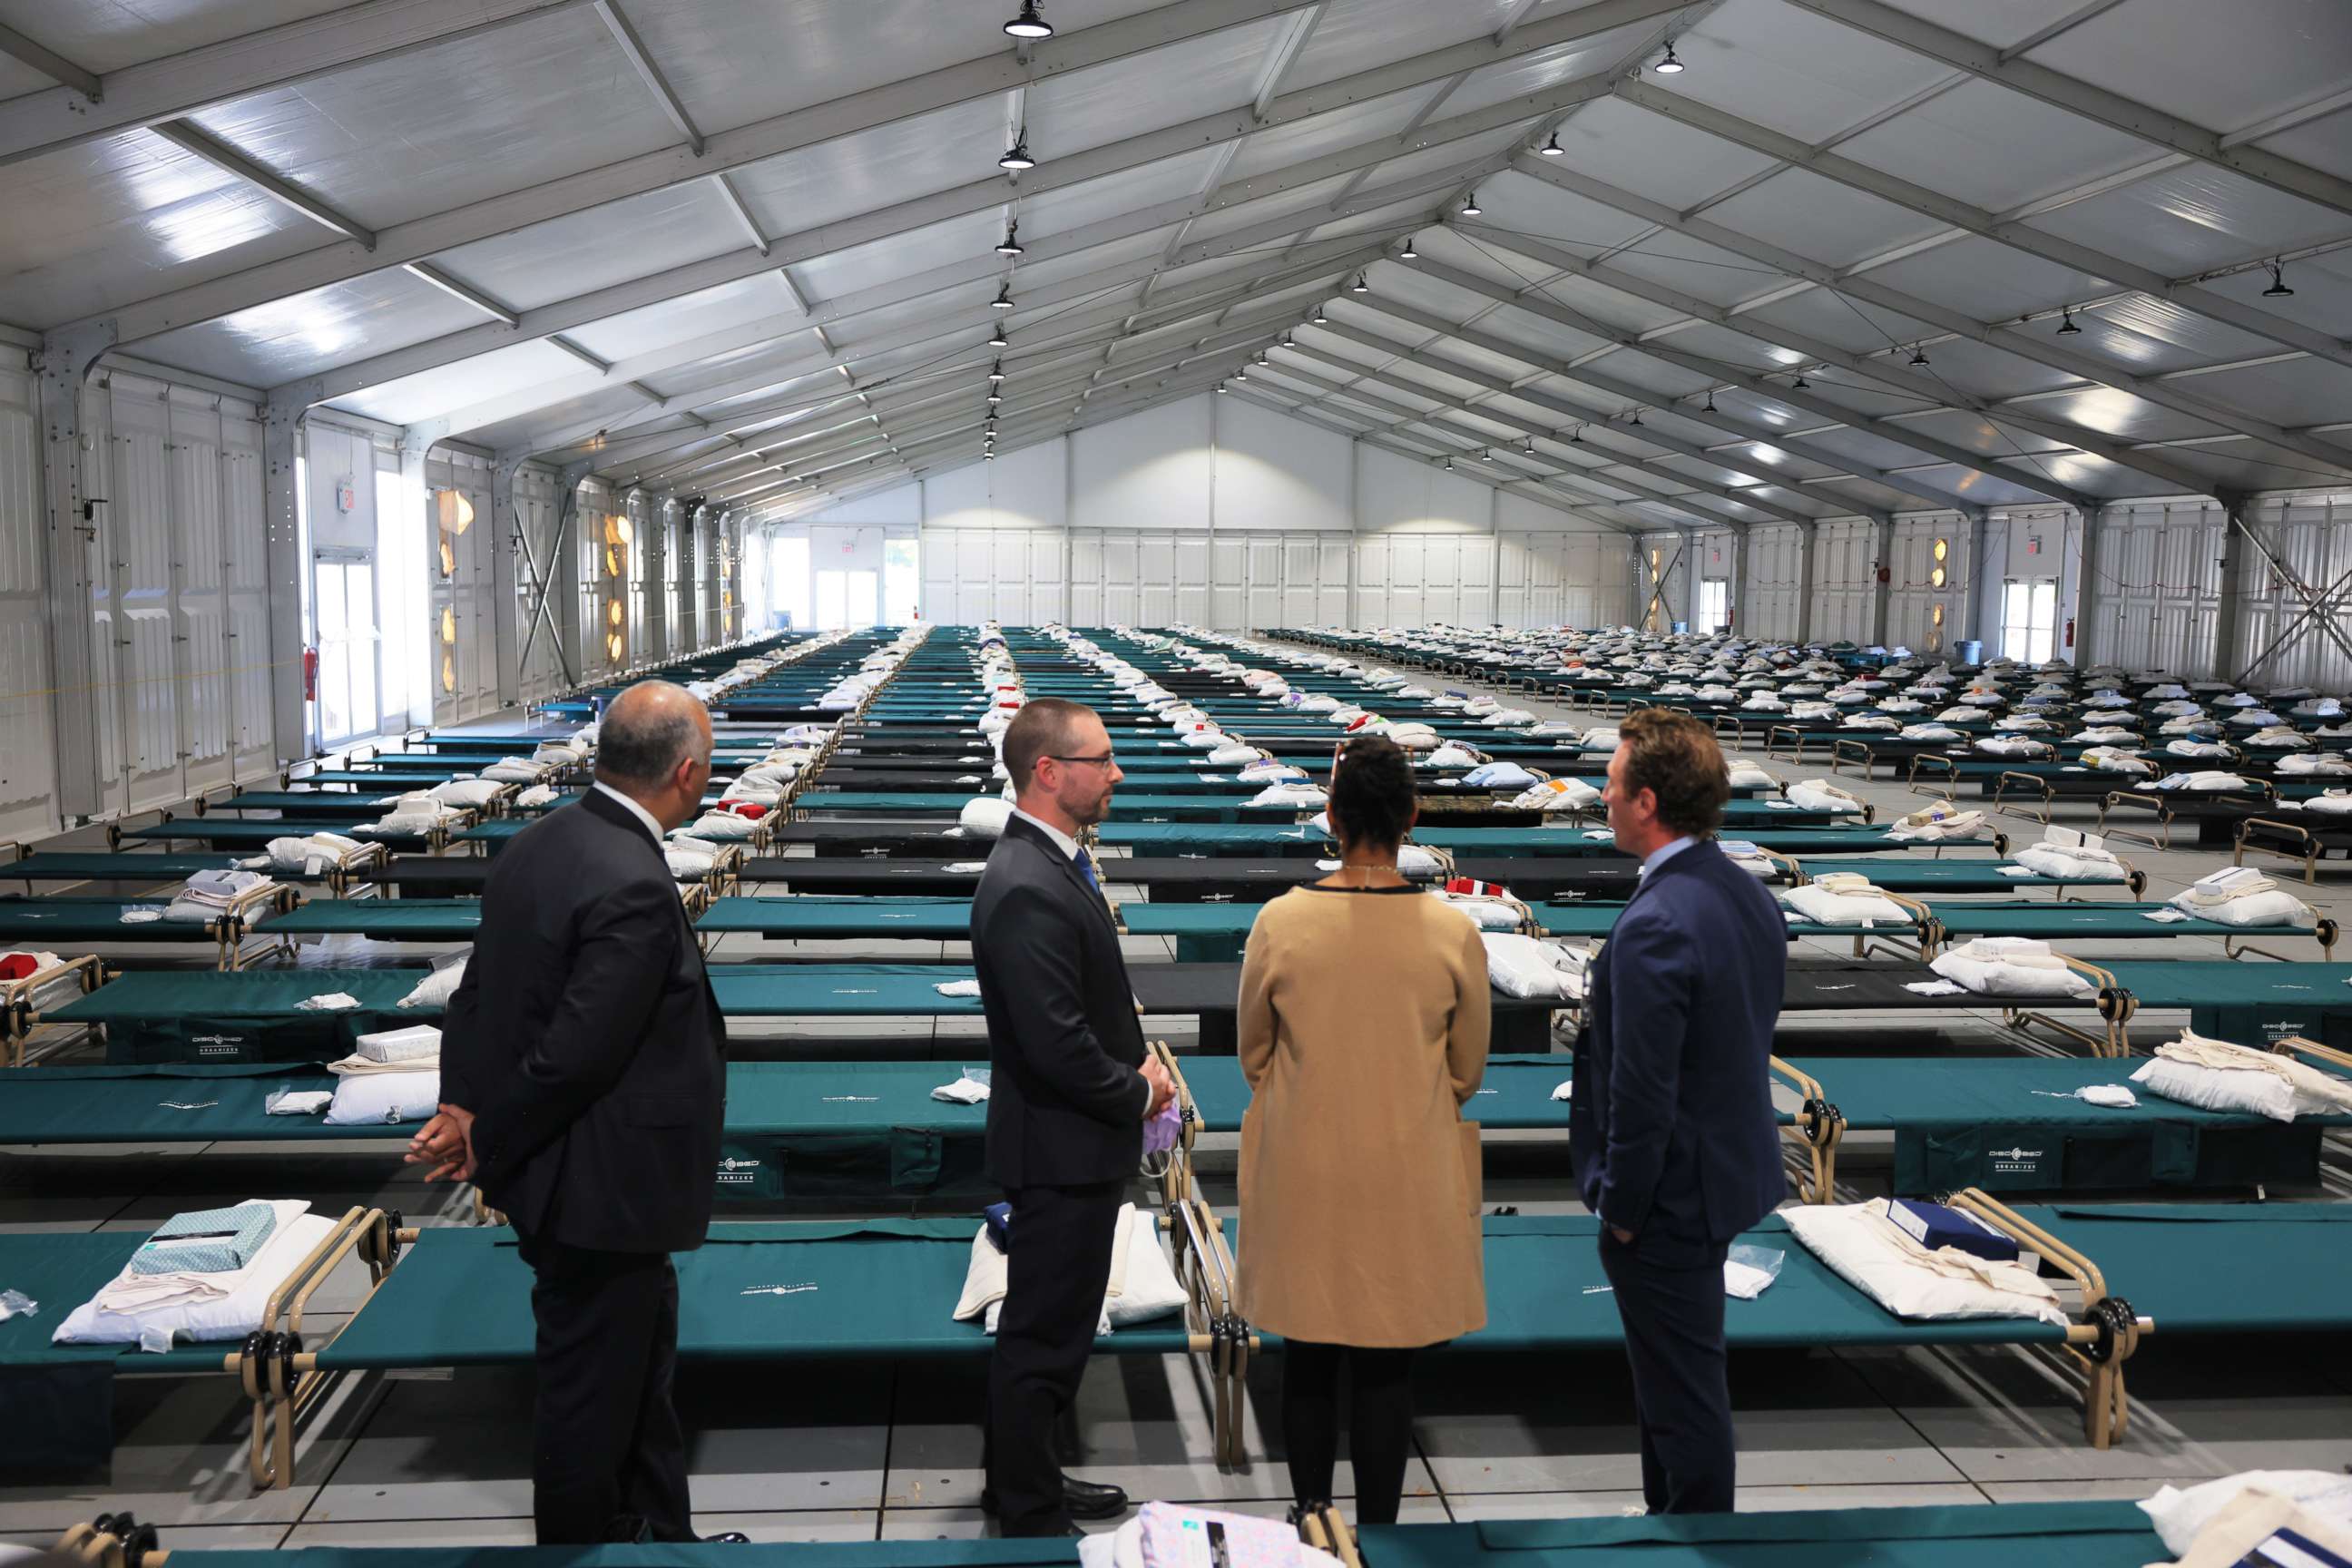 PHOTO:Officials look out into the dormitory during a tour of the Randall's Island Humanitarian Emergency Response and Relief Center on Oct. 18, 2022, in New York City.